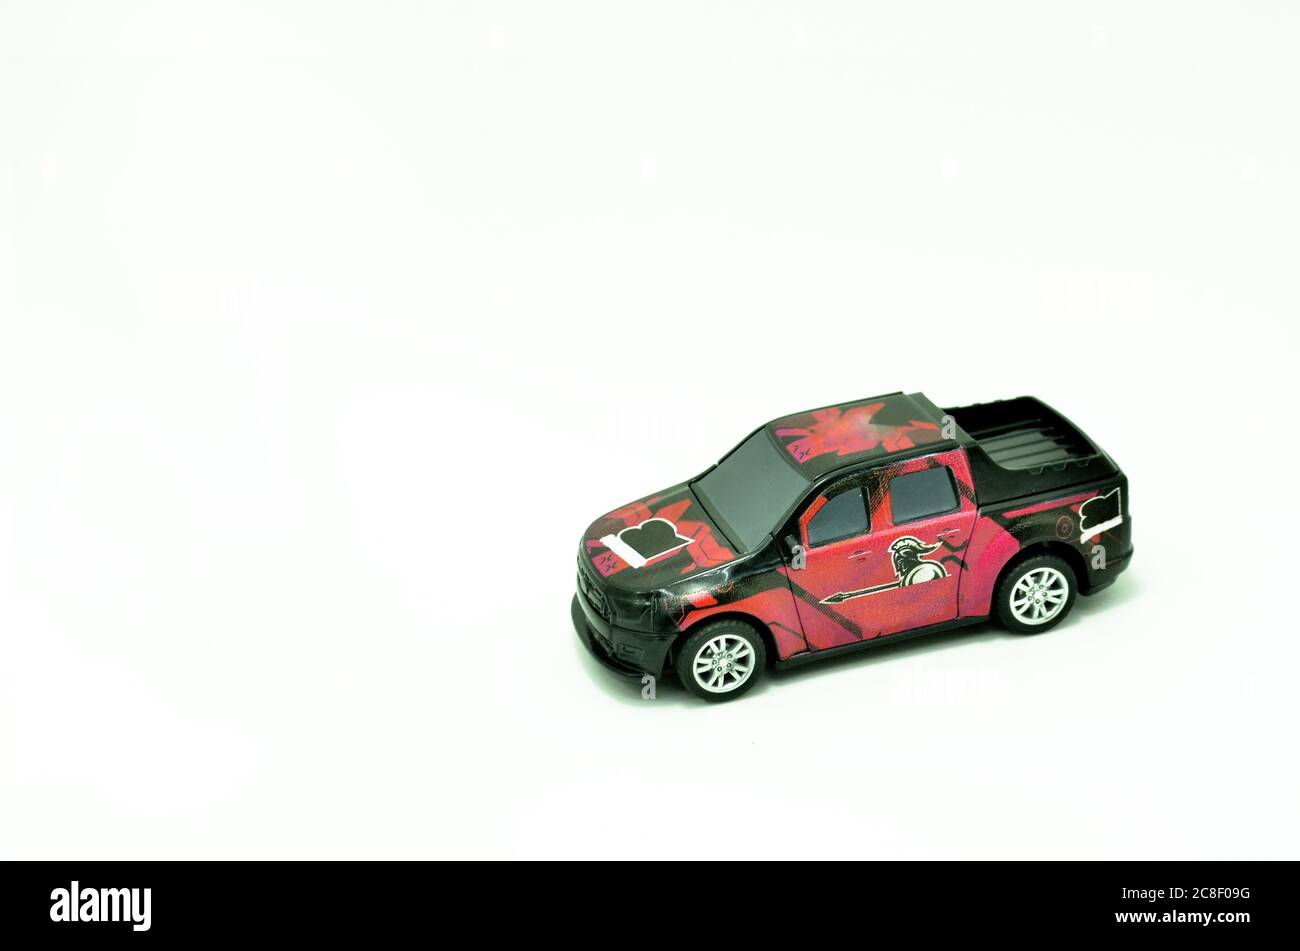 Red and black  Plastic Toy Car Isolated on White Background Stock Photo